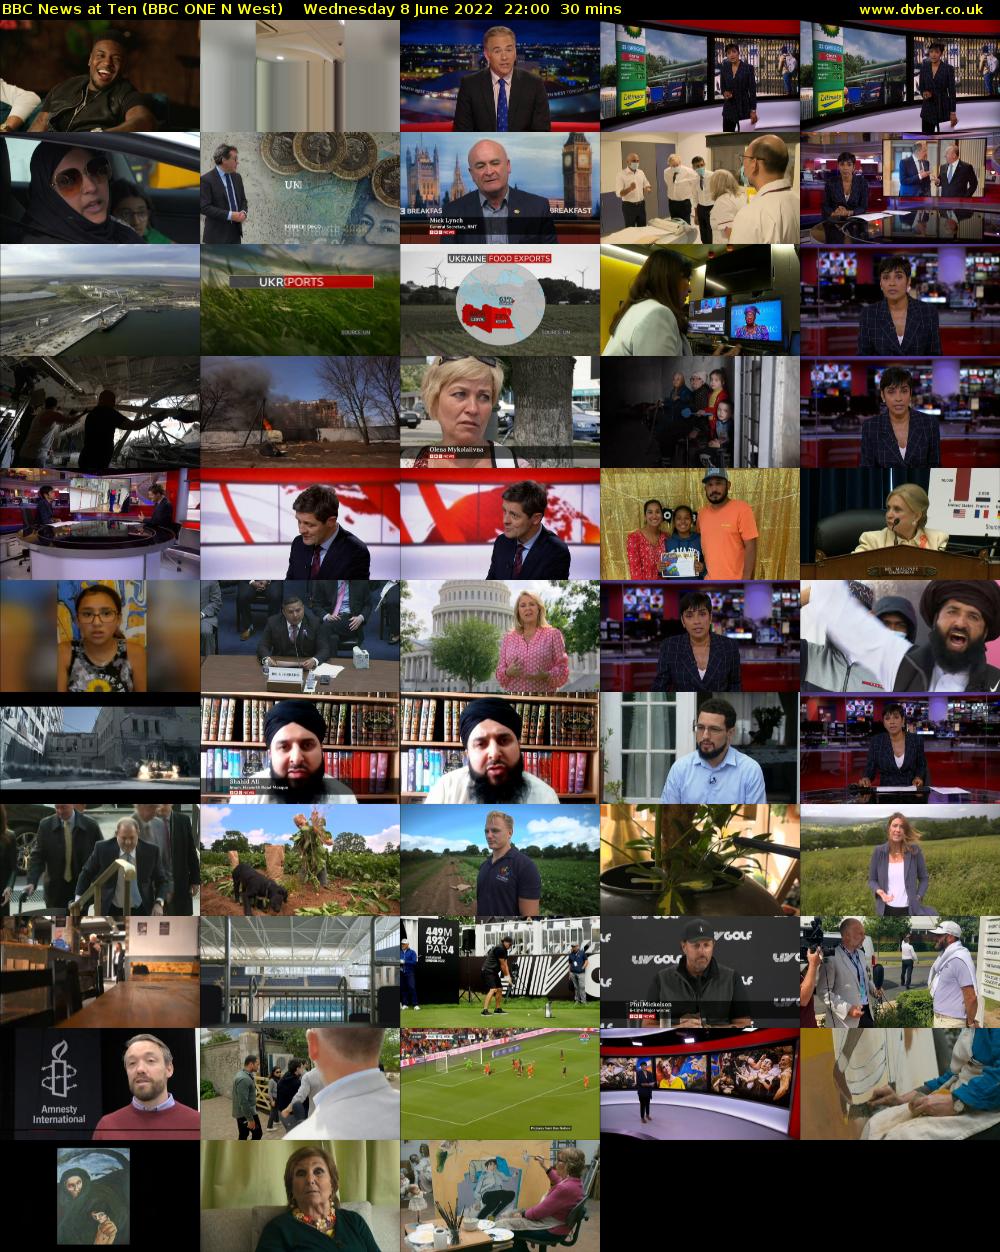 BBC News at Ten (BBC ONE N West) Wednesday 8 June 2022 22:00 - 22:30